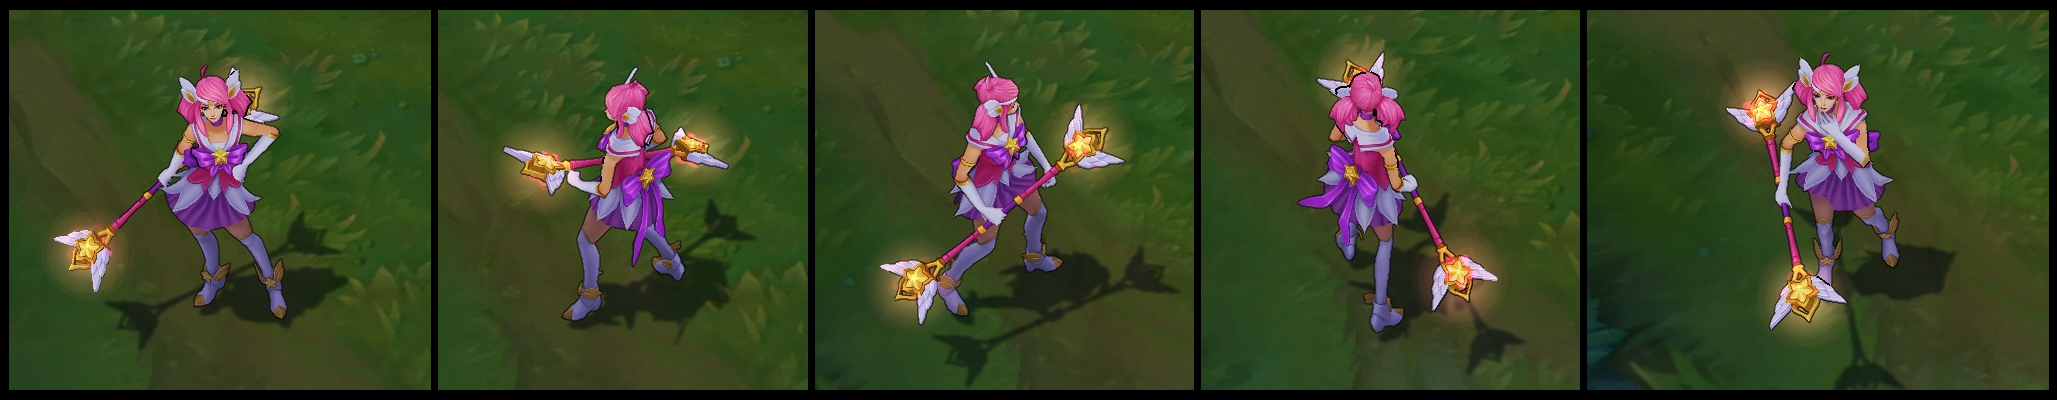 Star Guardian Lux Poses